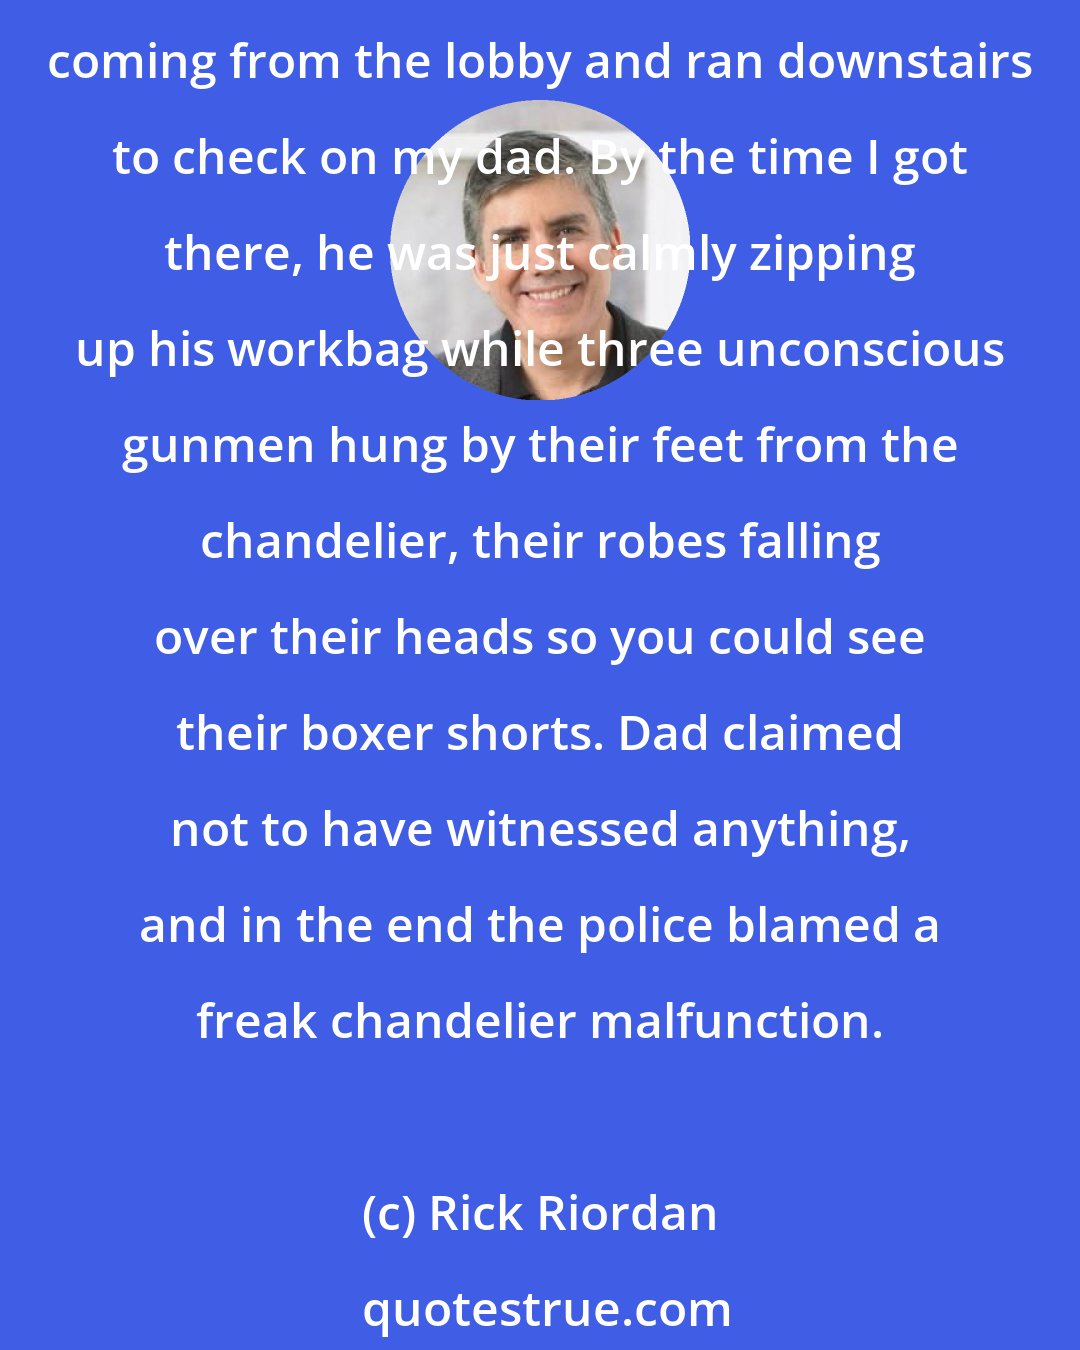 Rick Riordan: The other thing that troubled me: Dad was clutching his workbag. Usually when he does that, it means we're in danger. Like the time gunmen stormed into our hotel in Cairo. I heard shots coming from the lobby and ran downstairs to check on my dad. By the time I got there, he was just calmly zipping up his workbag while three unconscious gunmen hung by their feet from the chandelier, their robes falling over their heads so you could see their boxer shorts. Dad claimed not to have witnessed anything, and in the end the police blamed a freak chandelier malfunction.